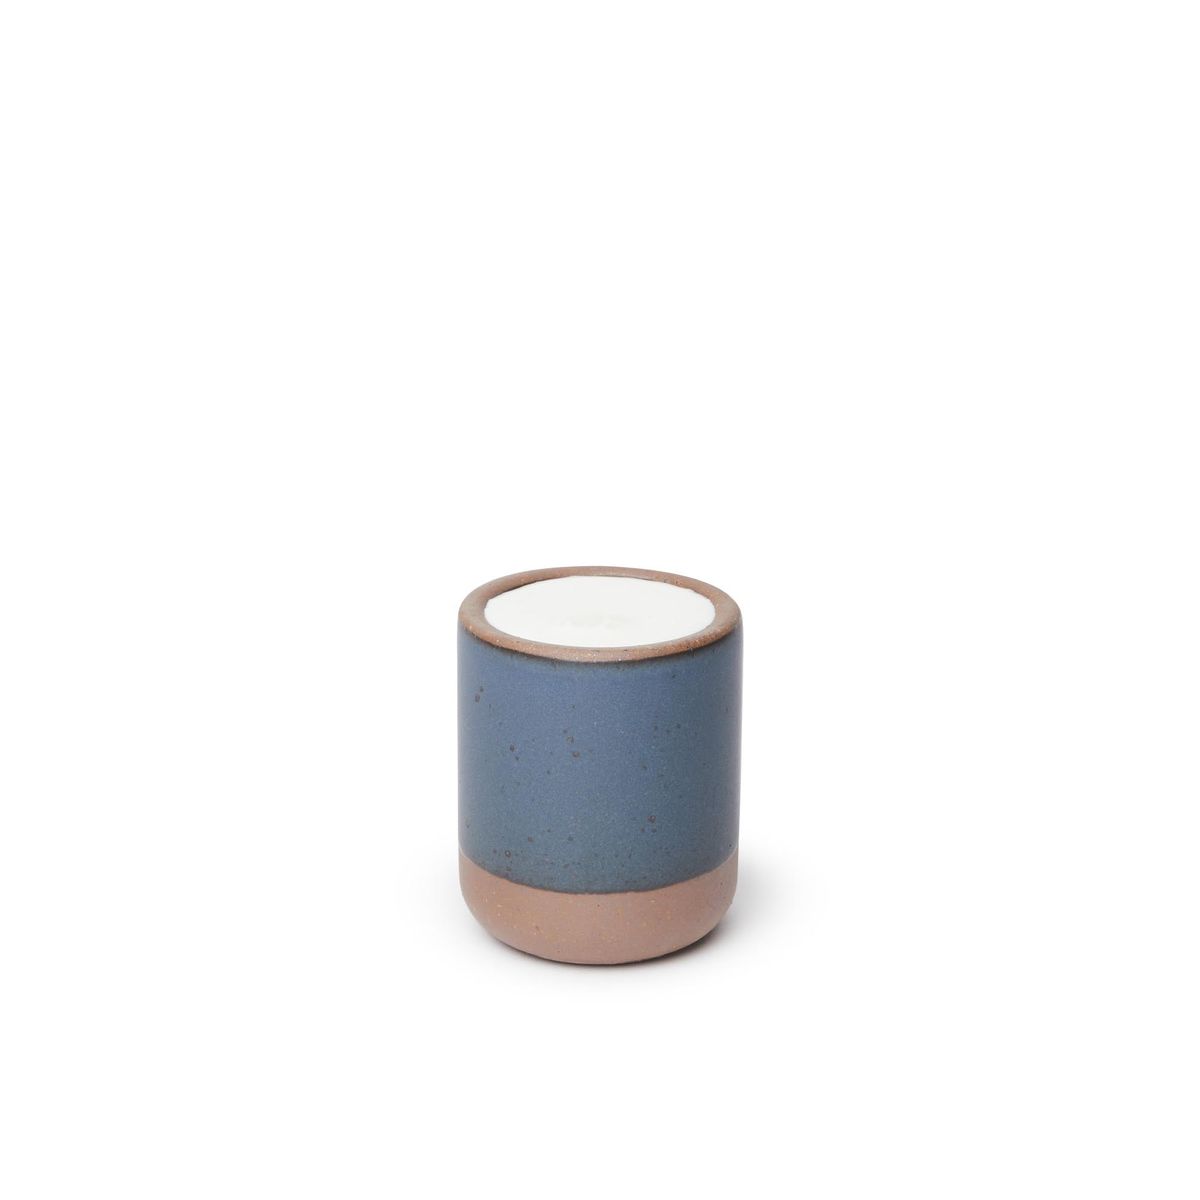 A small, short ceramic mug cup in a toned-down navy color featuring iron speckles and unglazed rim and bottom base, filled with milk.